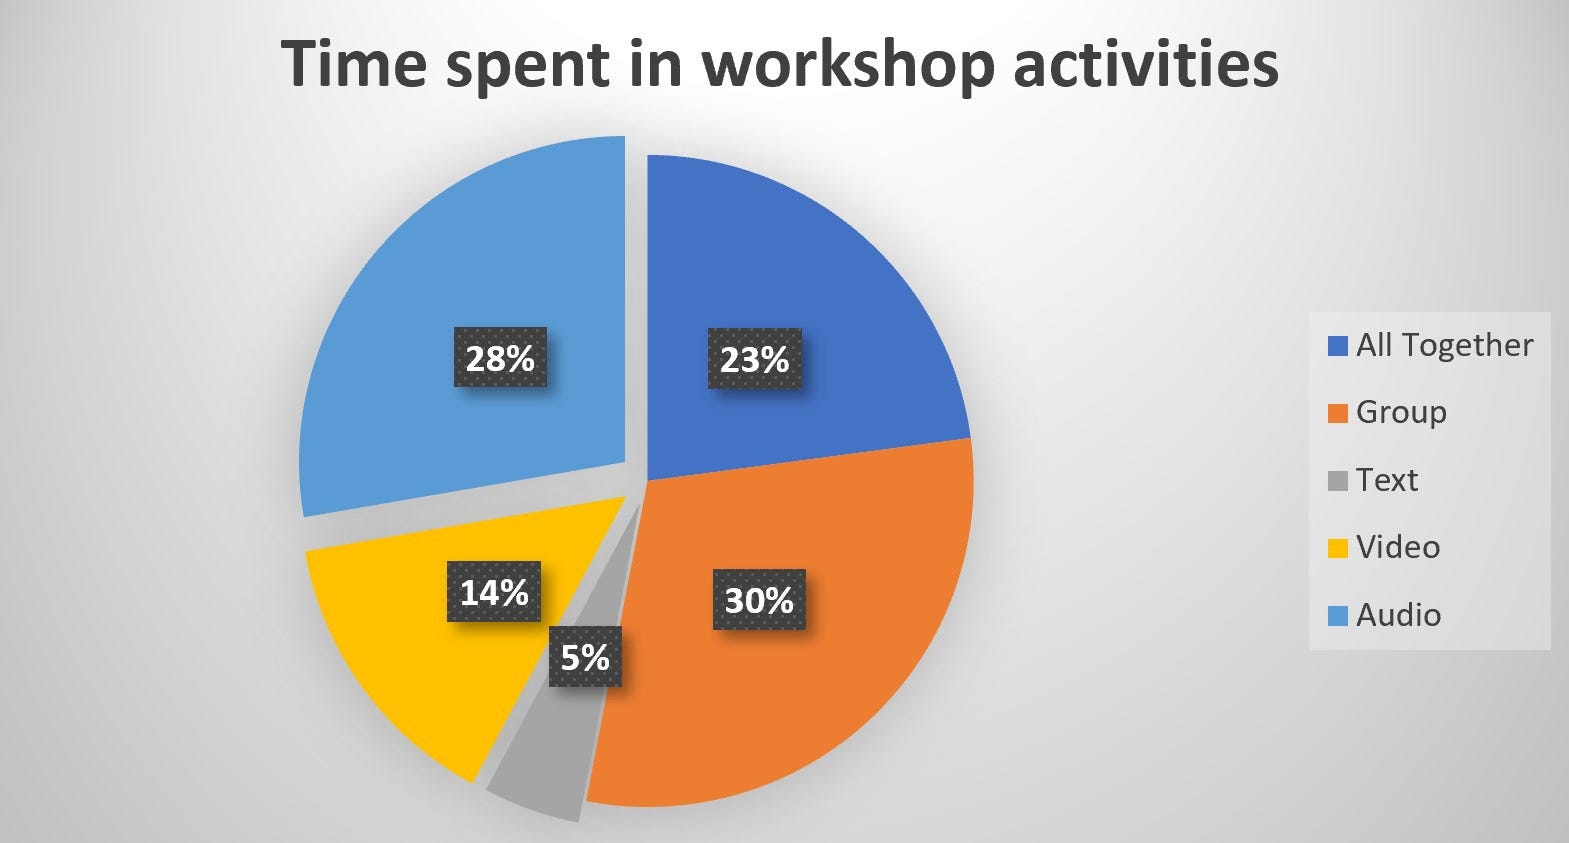 Pie chart of time spent on workshop activities: 30% small group, 28% audio, 23% all together, 14% video, 5% text